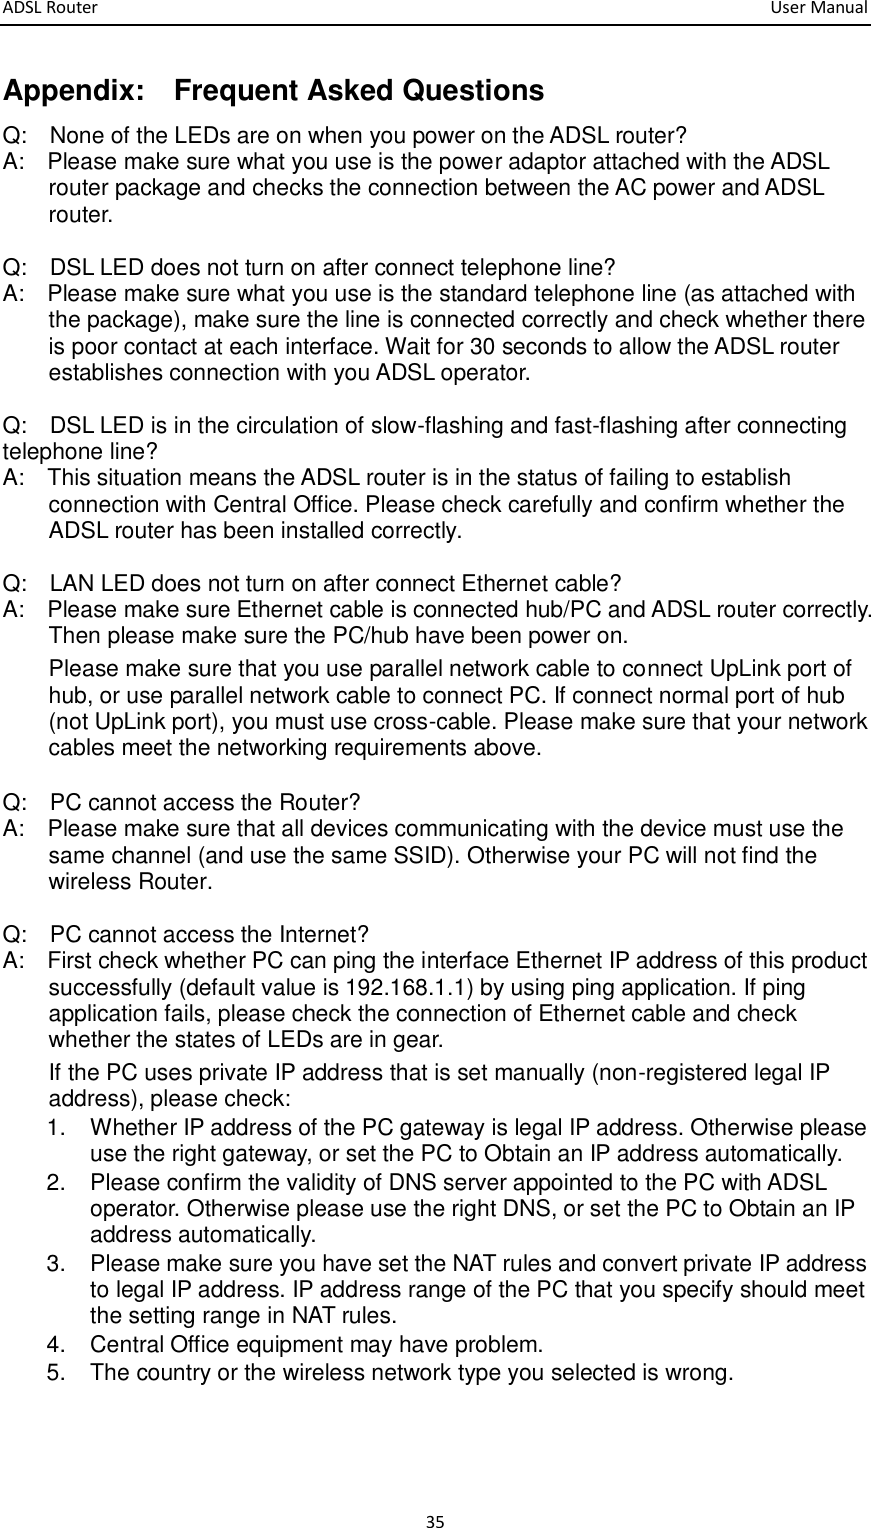 ADSL Router       User Manual 35 Appendix:    Frequent Asked Questions   Q:    None of the LEDs are on when you power on the ADSL router? A:    Please make sure what you use is the power adaptor attached with the ADSL router package and checks the connection between the AC power and ADSL router.    Q:    DSL LED does not turn on after connect telephone line? A:    Please make sure what you use is the standard telephone line (as attached with the package), make sure the line is connected correctly and check whether there is poor contact at each interface. Wait for 30 seconds to allow the ADSL router establishes connection with you ADSL operator.    Q:    DSL LED is in the circulation of slow-flashing and fast-flashing after connecting telephone line? A:    This situation means the ADSL router is in the status of failing to establish connection with Central Office. Please check carefully and confirm whether the ADSL router has been installed correctly.  Q:    LAN LED does not turn on after connect Ethernet cable? A:    Please make sure Ethernet cable is connected hub/PC and ADSL router correctly. Then please make sure the PC/hub have been power on. Please make sure that you use parallel network cable to connect UpLink port of hub, or use parallel network cable to connect PC. If connect normal port of hub (not UpLink port), you must use cross-cable. Please make sure that your network cables meet the networking requirements above.  Q:    PC cannot access the Router? A:    Please make sure that all devices communicating with the device must use the same channel (and use the same SSID). Otherwise your PC will not find the wireless Router.  Q:    PC cannot access the Internet?   A:    First check whether PC can ping the interface Ethernet IP address of this product successfully (default value is 192.168.1.1) by using ping application. If ping application fails, please check the connection of Ethernet cable and check whether the states of LEDs are in gear. If the PC uses private IP address that is set manually (non-registered legal IP address), please check: 1.  Whether IP address of the PC gateway is legal IP address. Otherwise please use the right gateway, or set the PC to Obtain an IP address automatically. 2.  Please confirm the validity of DNS server appointed to the PC with ADSL operator. Otherwise please use the right DNS, or set the PC to Obtain an IP address automatically.   3.  Please make sure you have set the NAT rules and convert private IP address to legal IP address. IP address range of the PC that you specify should meet the setting range in NAT rules.   4.  Central Office equipment may have problem. 5.  The country or the wireless network type you selected is wrong.       